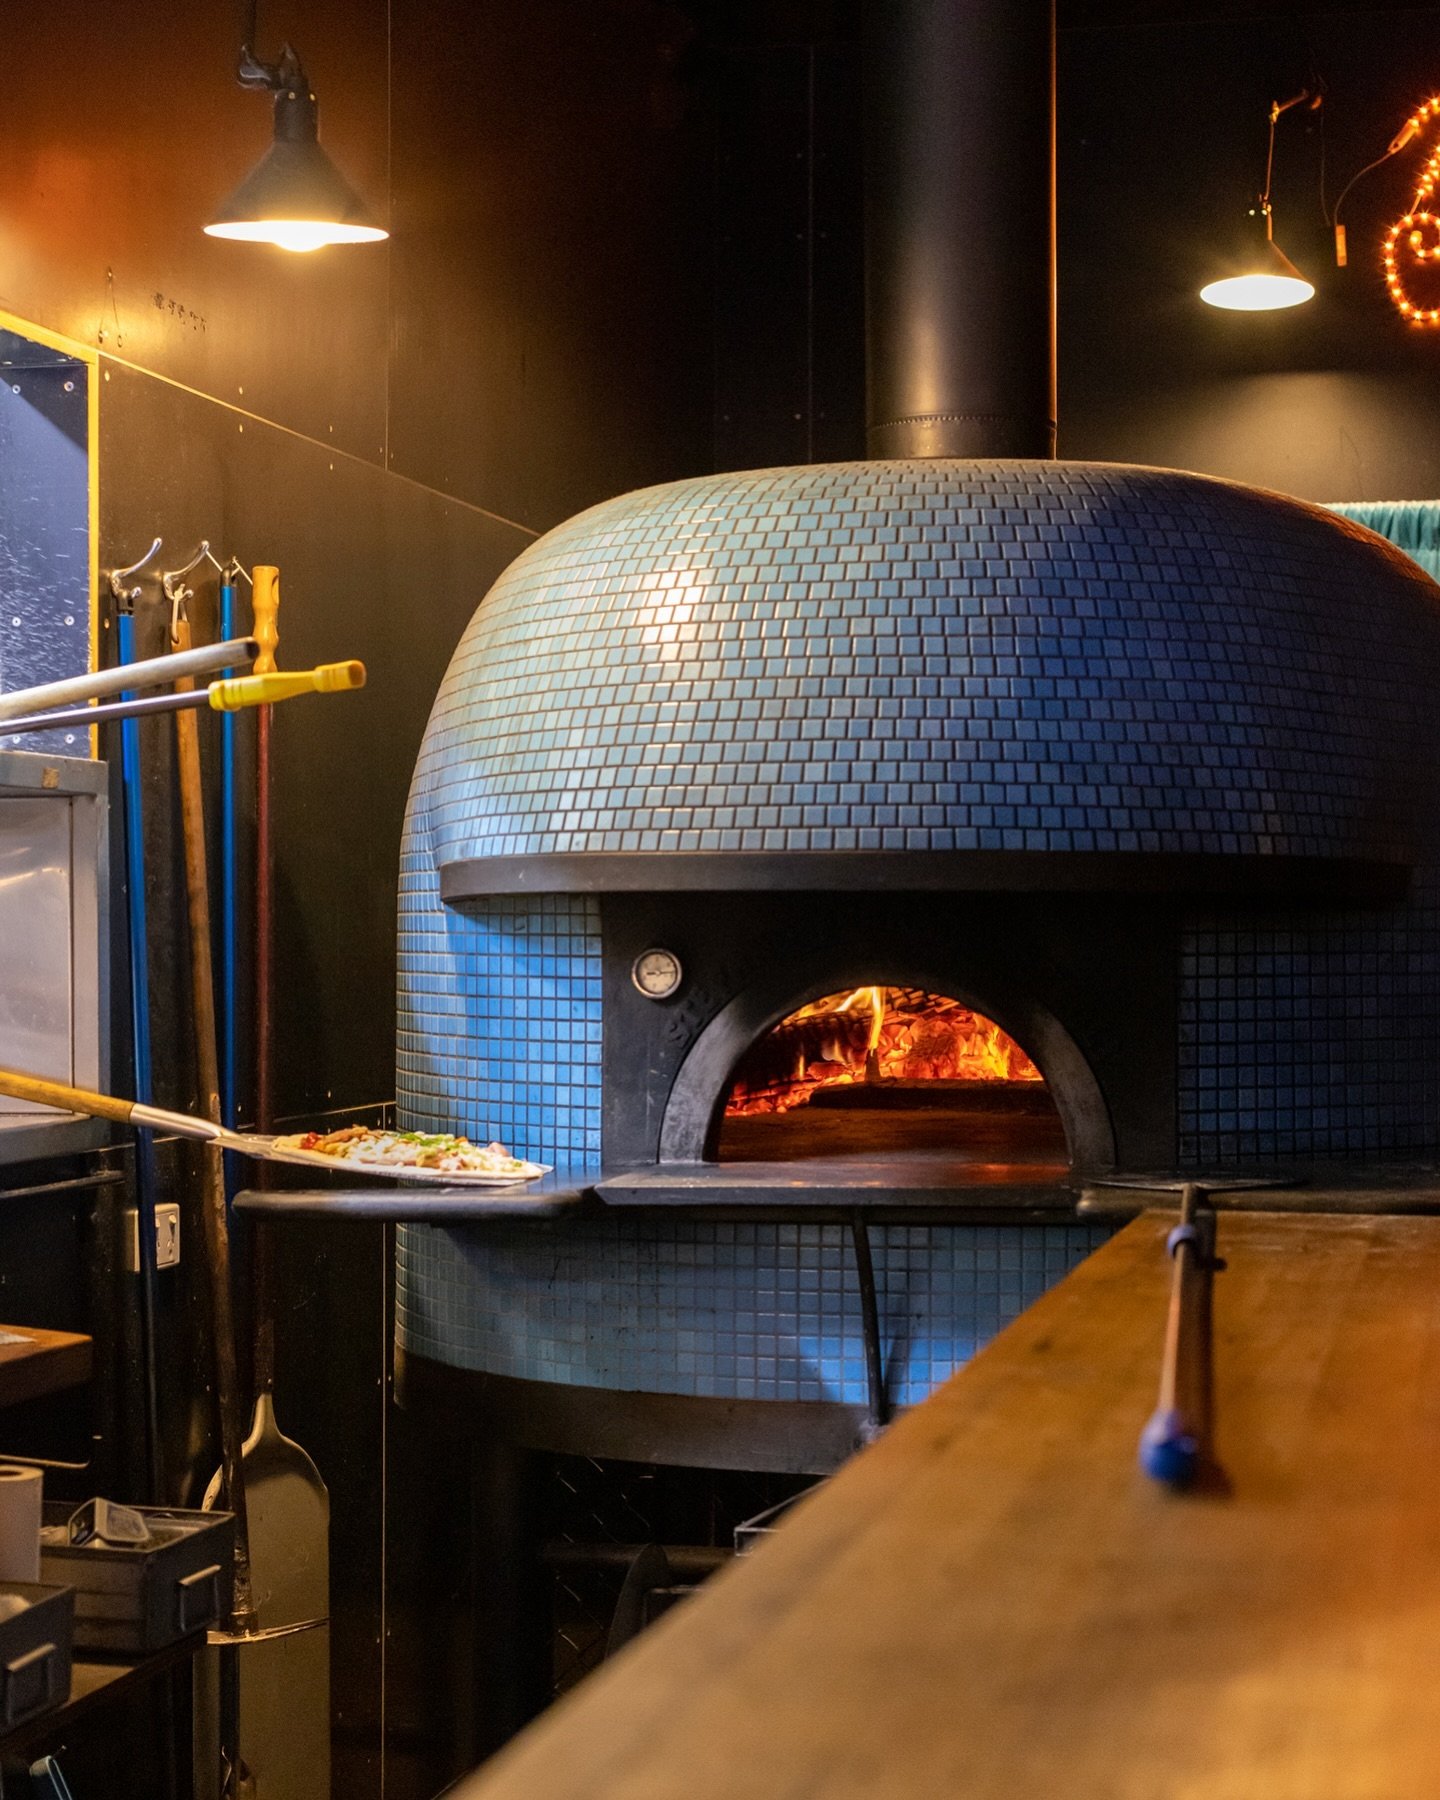 ✨ The star of the show ✨

A moment of gratitude for our beloved wood fired pizza oven&hellip; You can always count on her to deliver the goods 🙏🏻

Come down this weekend and see what she has to offer 🩵